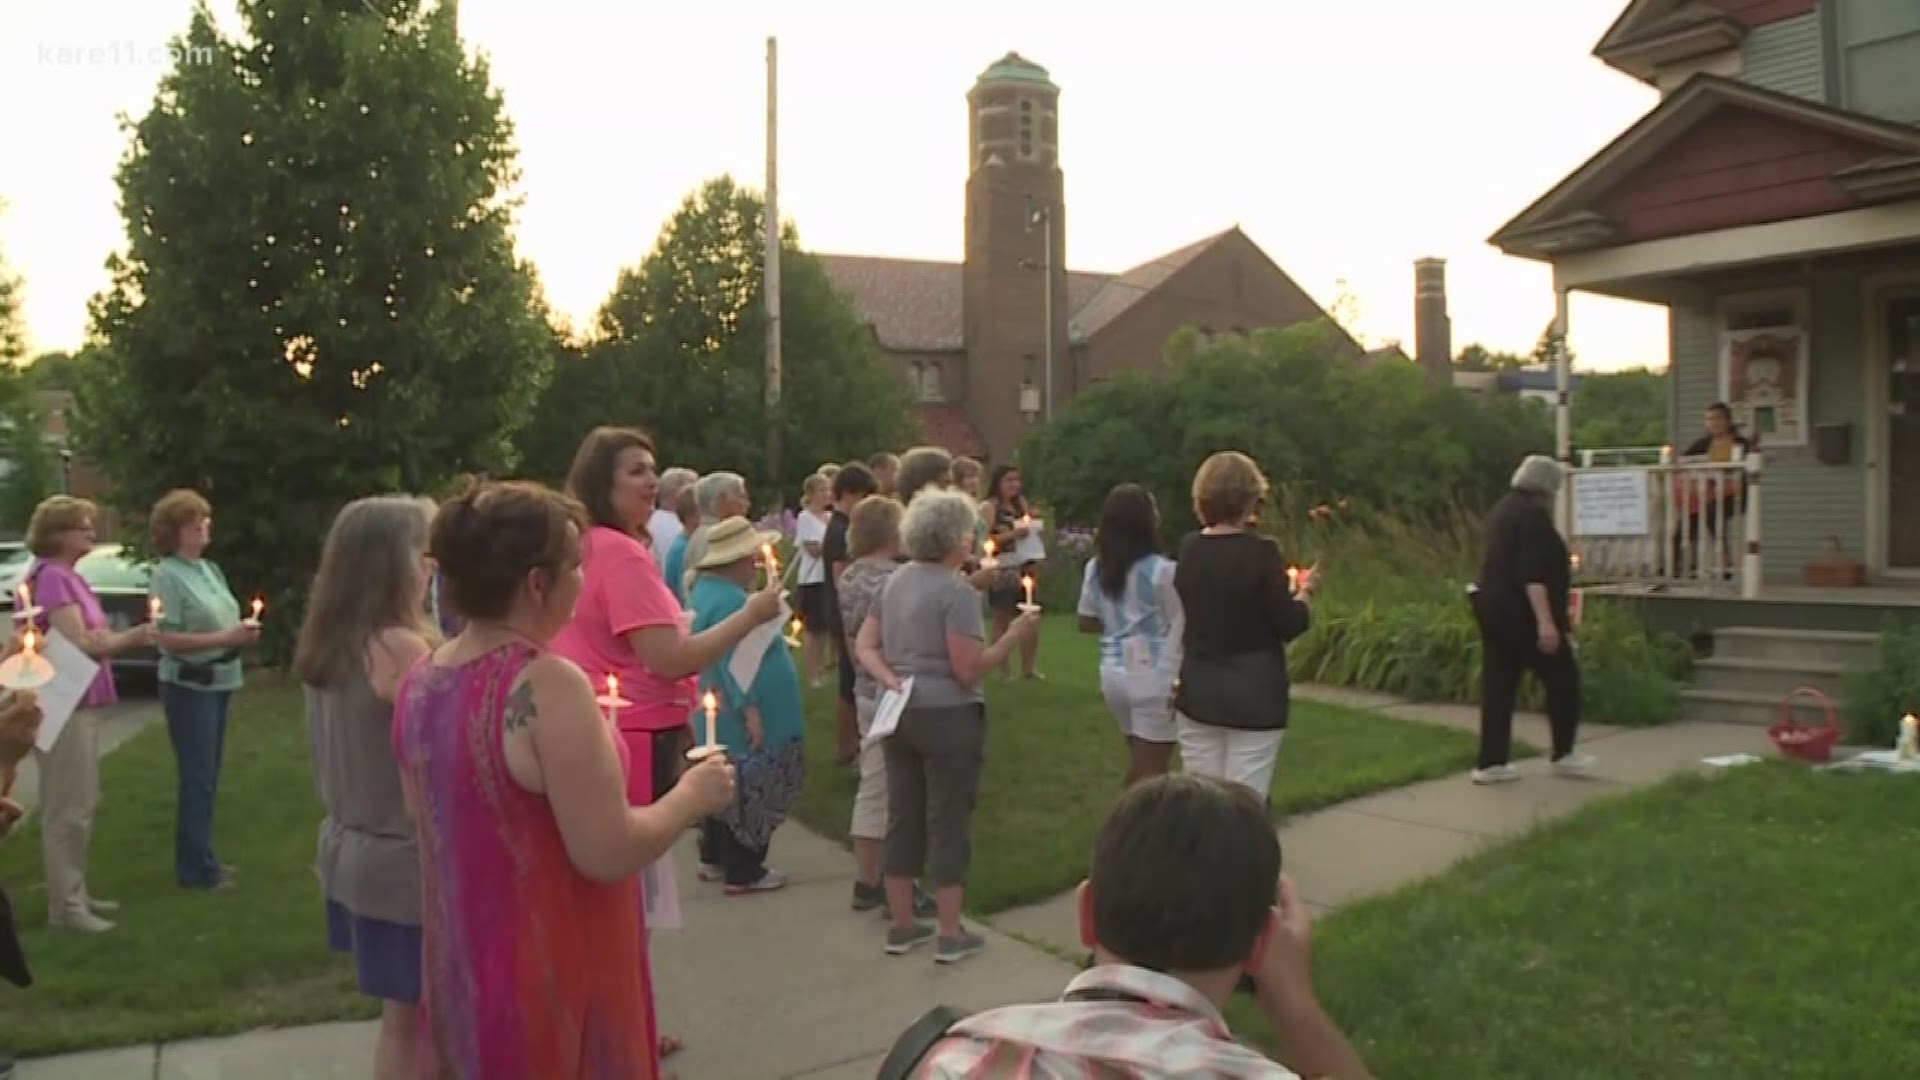 Protesters held a candle light vigil for St. Andrew's Church Sunday night.